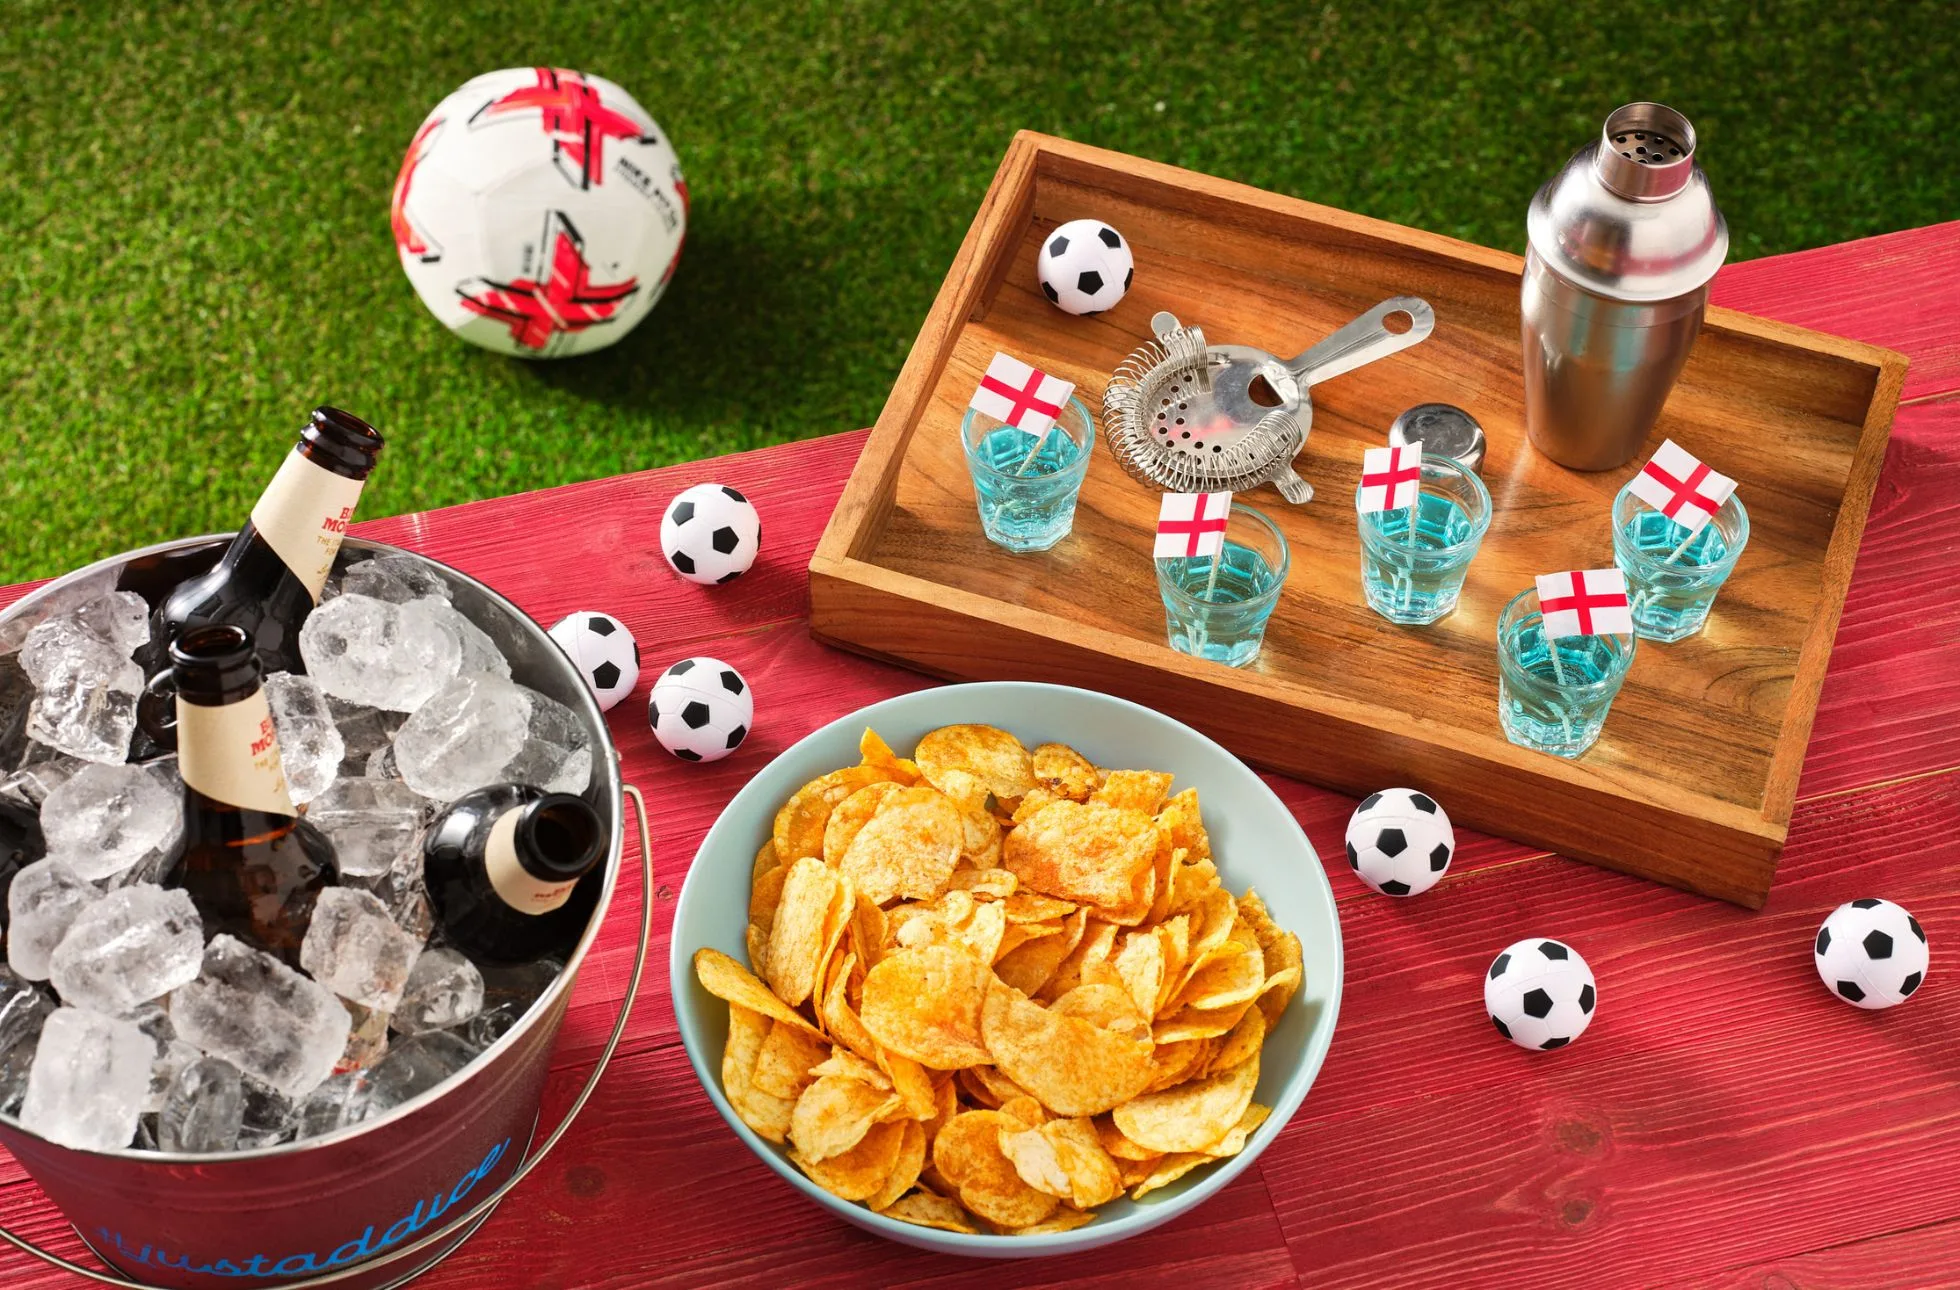 Beer bottles in an ice bucket next to a bowl of crisps, mini footballs and colourful shot drinks